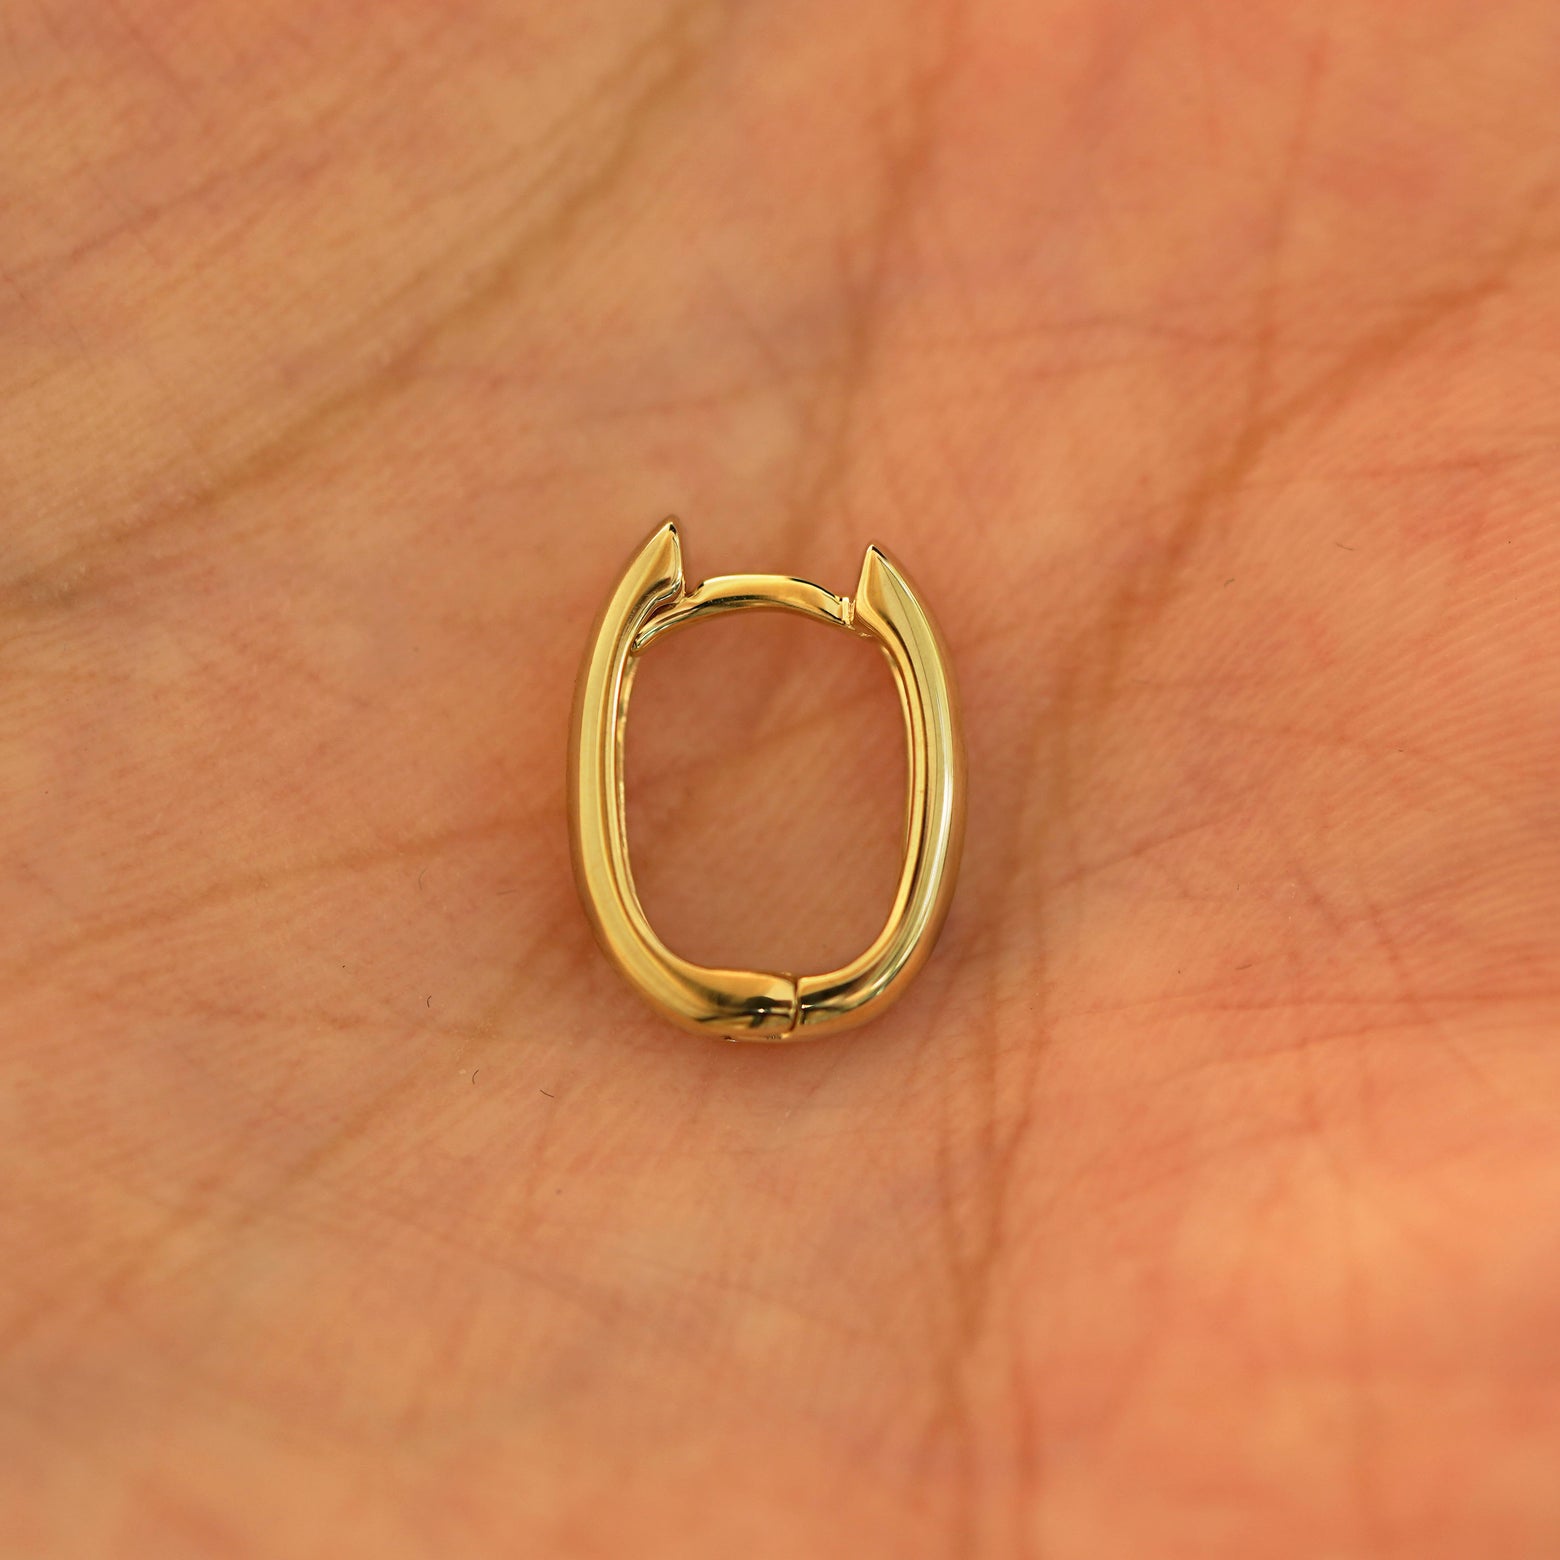 A single closed 14k yellow gold Thick Oval Huggie Hoop resting in a model's palm